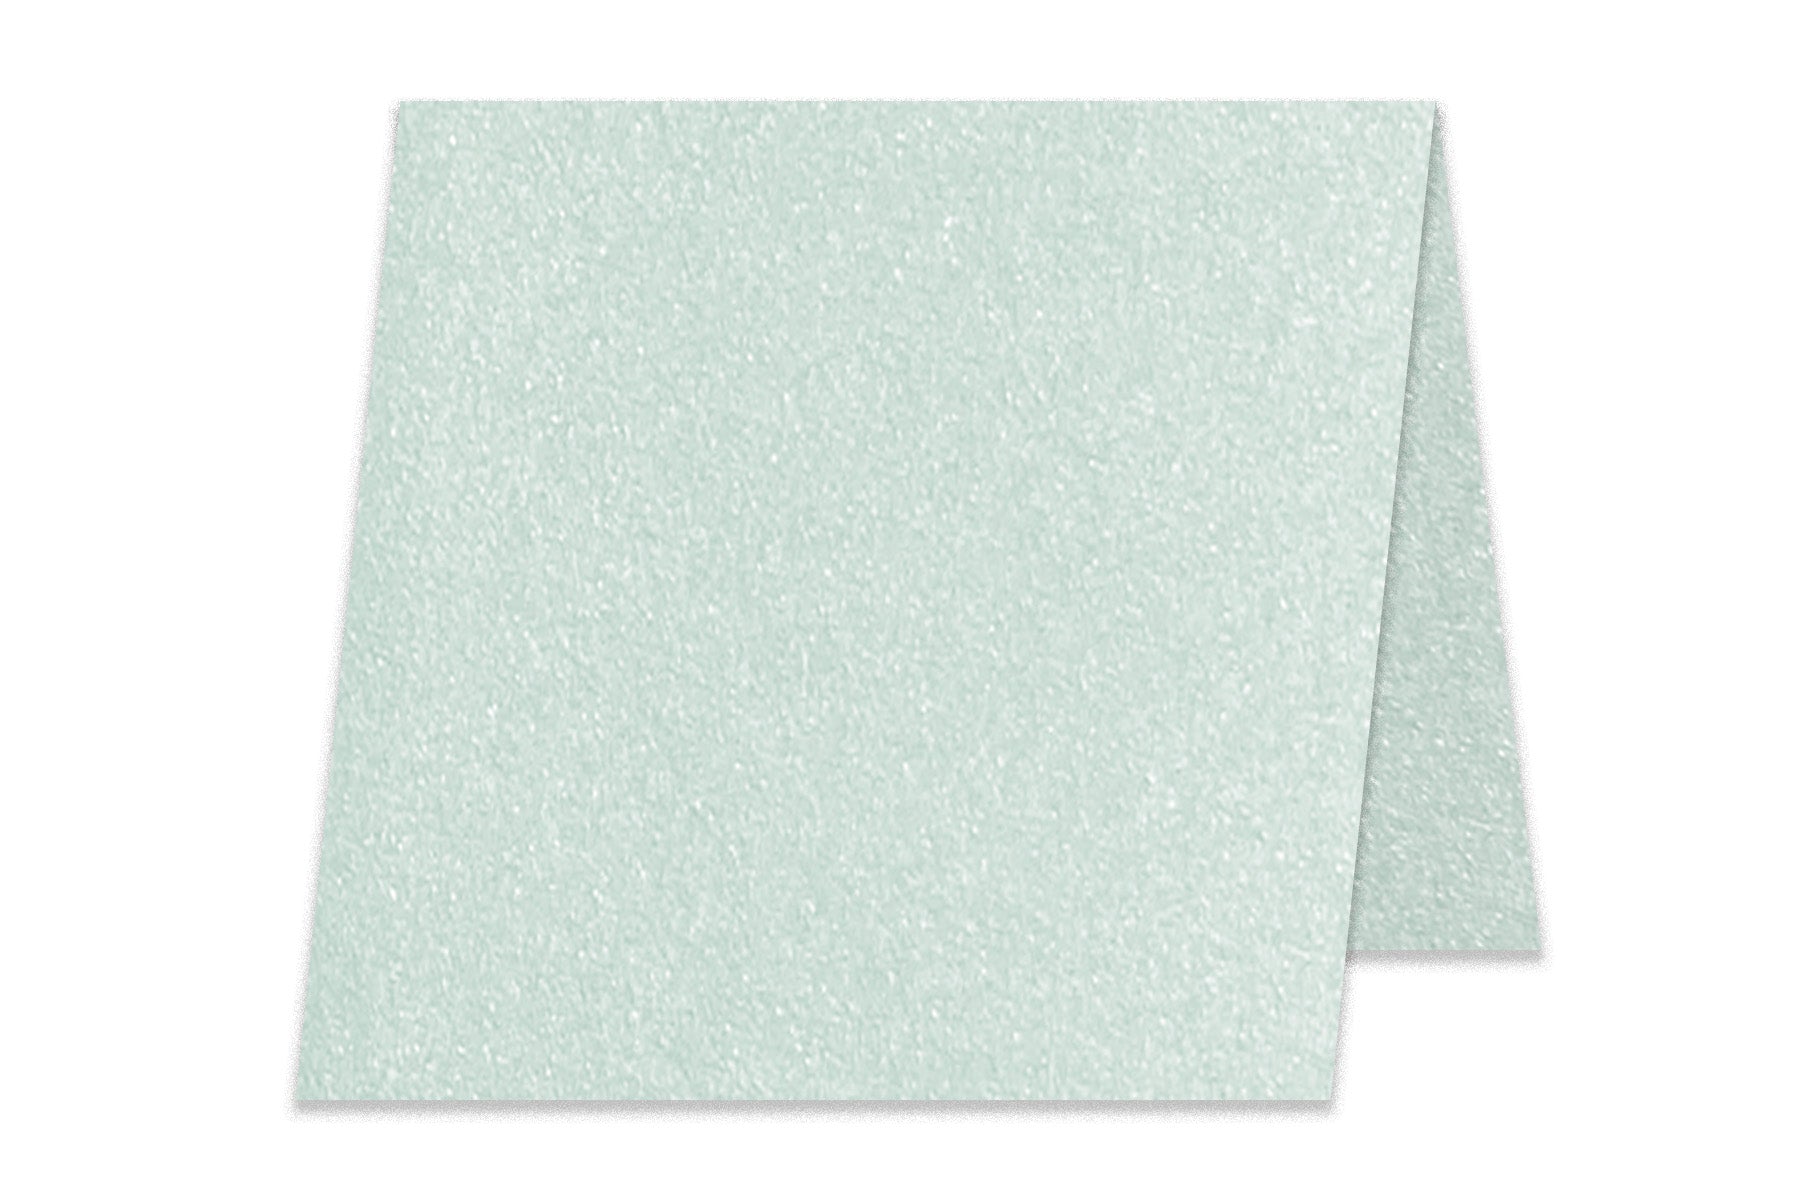 Blank Shimmery 3x3 folded cardstock for gift tags and mini cards -  CutCardStock